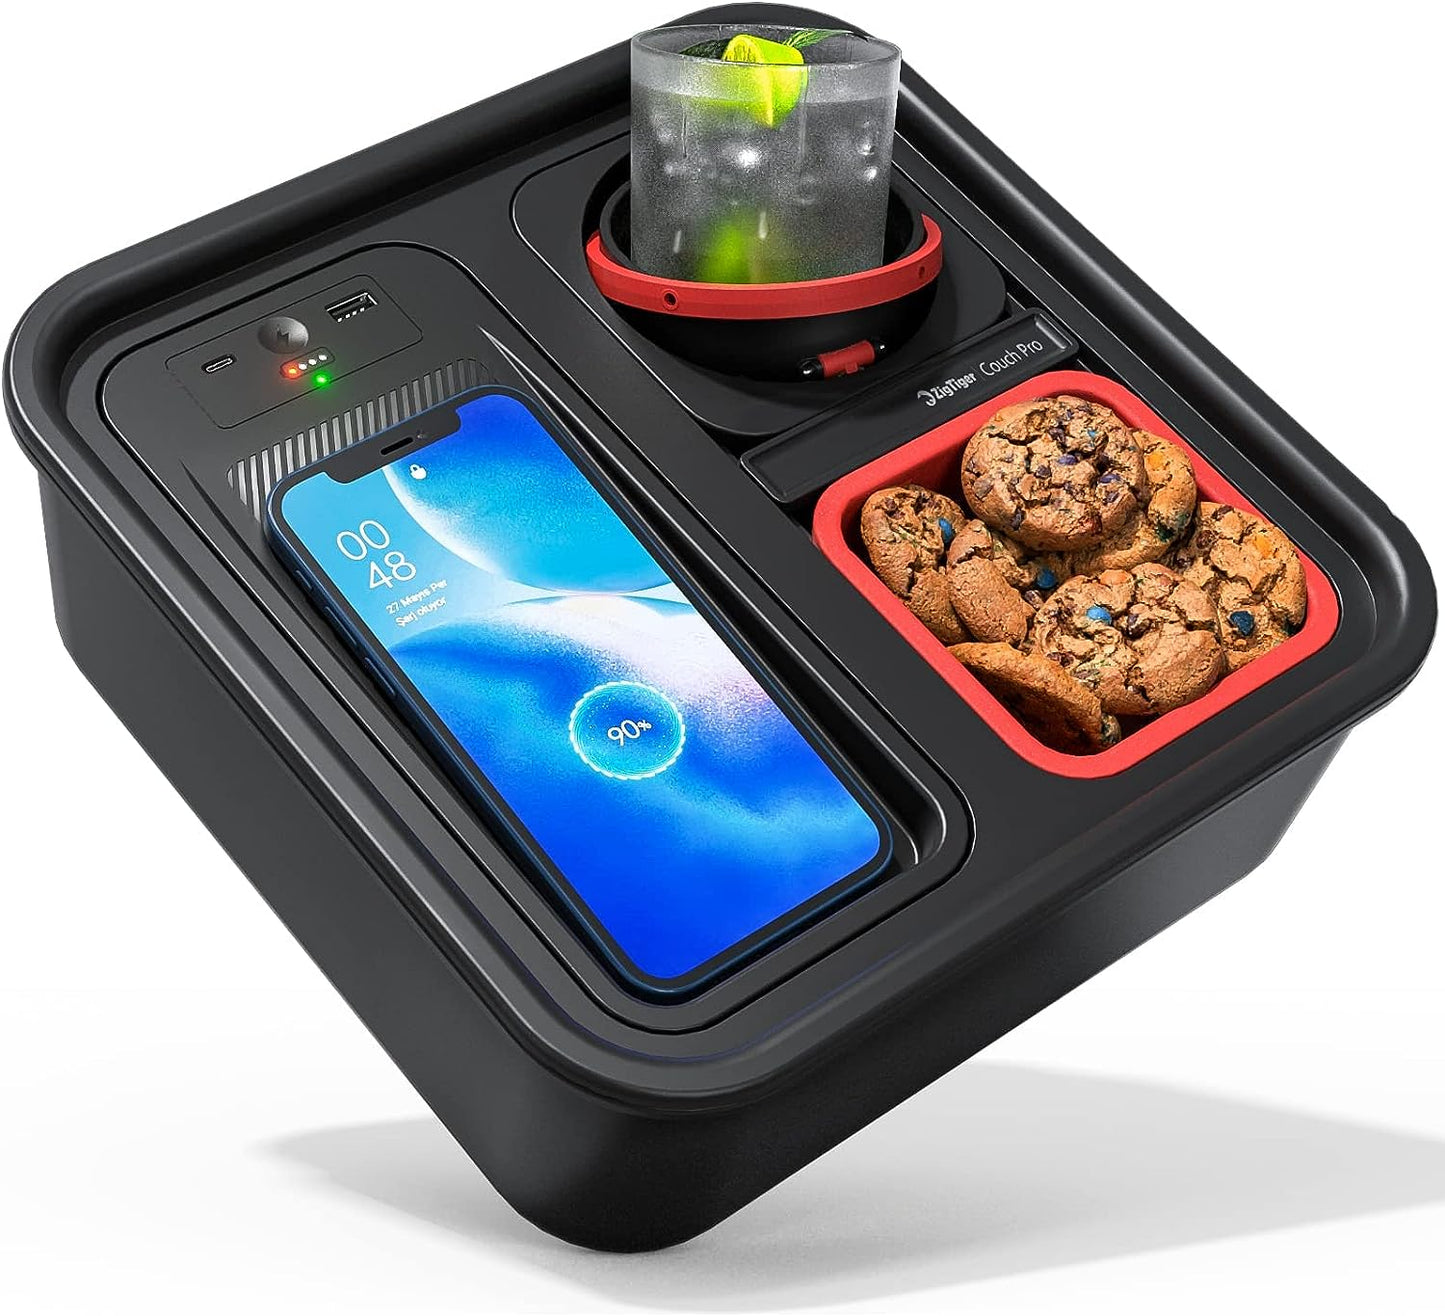 A+ Cup Holder Tray with Wireless Power Bank, Sofa Caddy with Self Balancing Cup Holder & Snack Cup, Sofa Armrest Table Tray, Couch Storage Organizer for Living Room, Car, Game,USB A+C Port